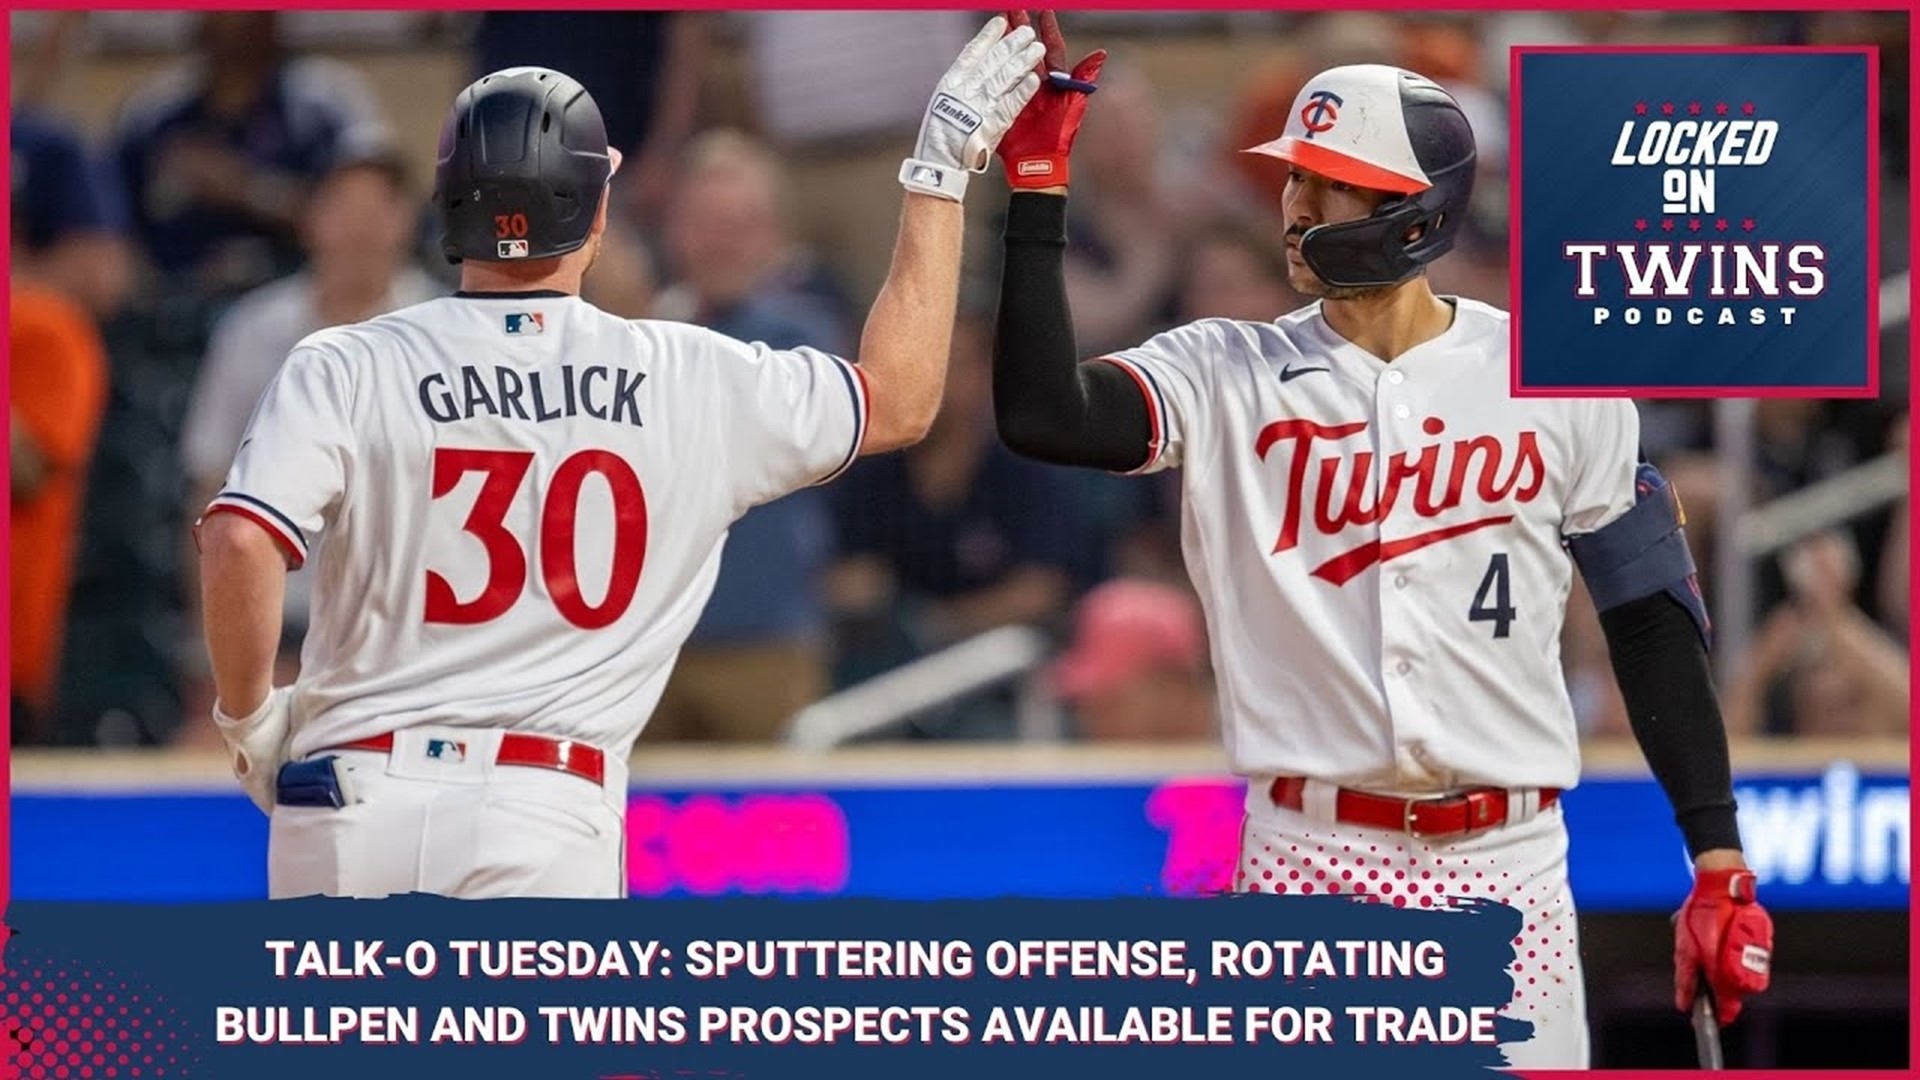 This episode of Locked On Twins is the premiere edition of Talk-o Tuesday, where fans drive the content through submitted questions answered by host Brandon Warne.